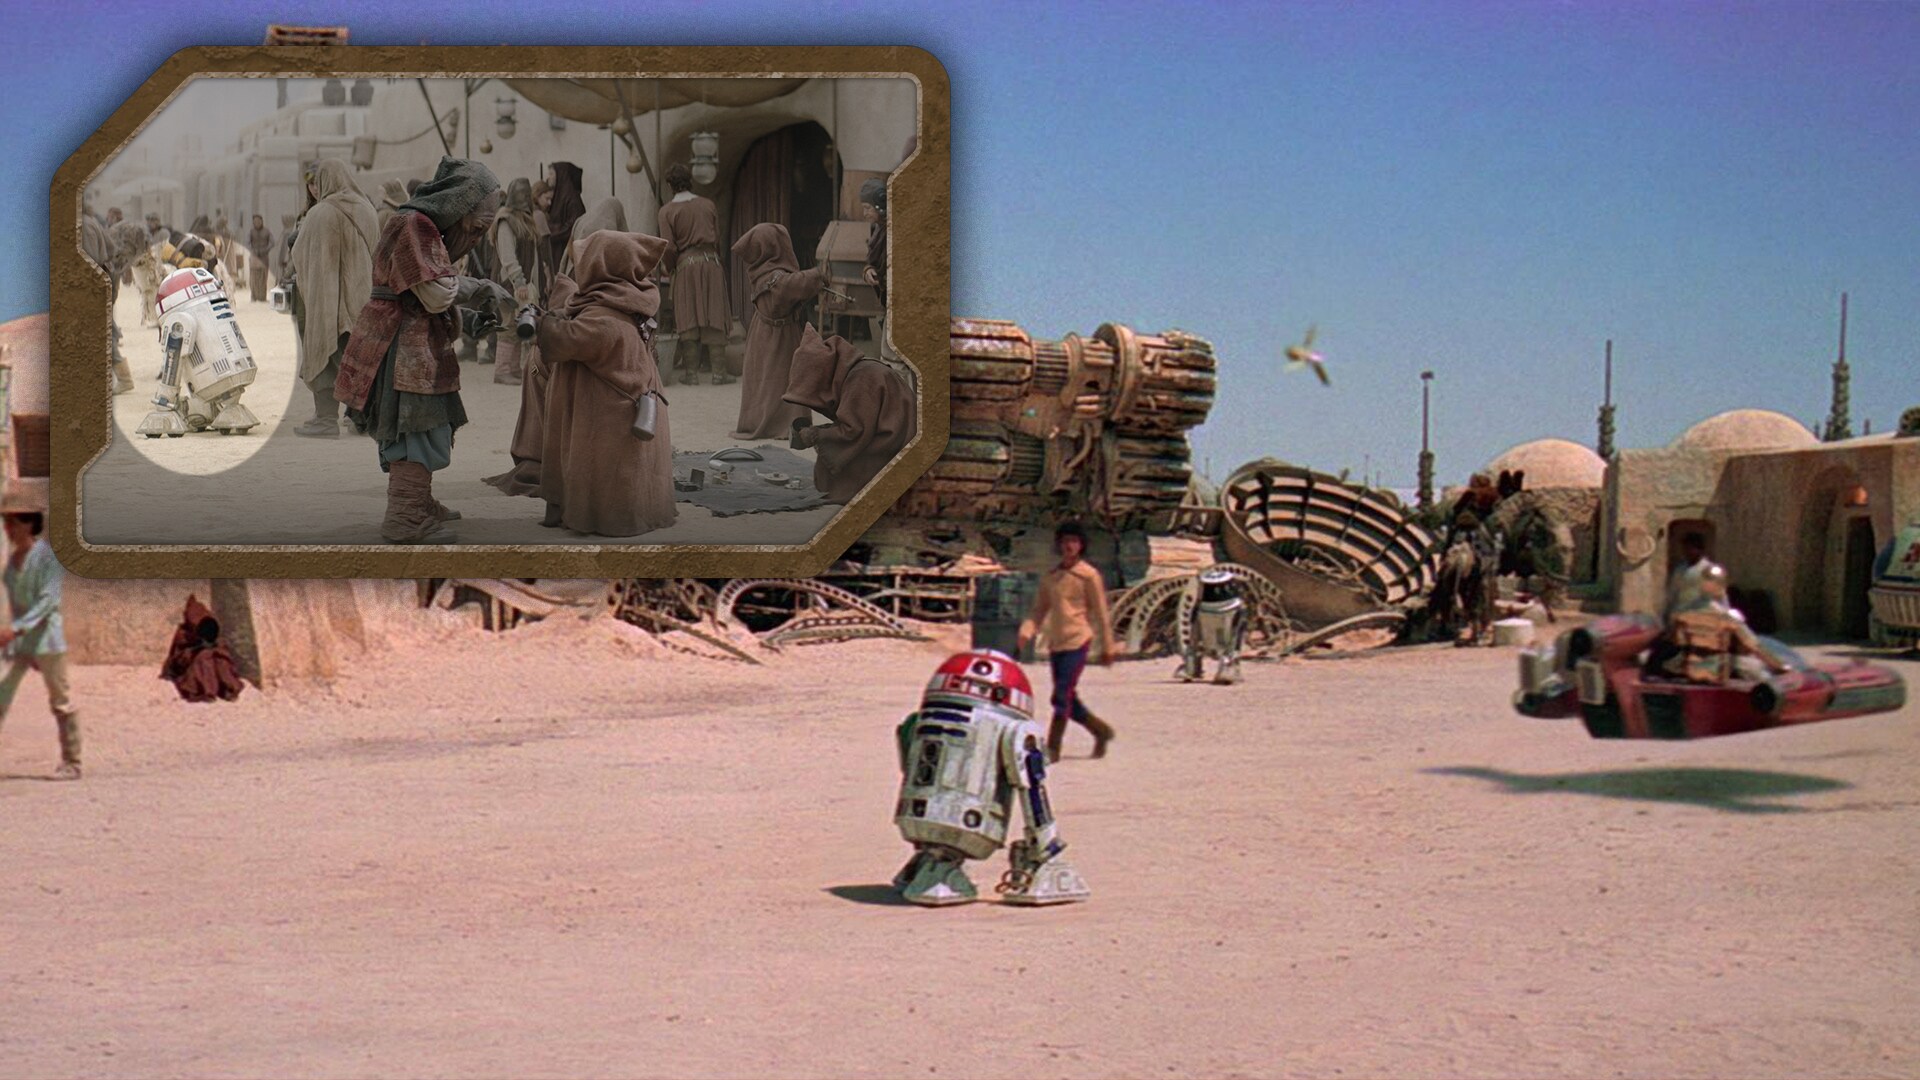 As the episode opens in Mos Eisley, one of the background droids is a recreation of an astromech ...